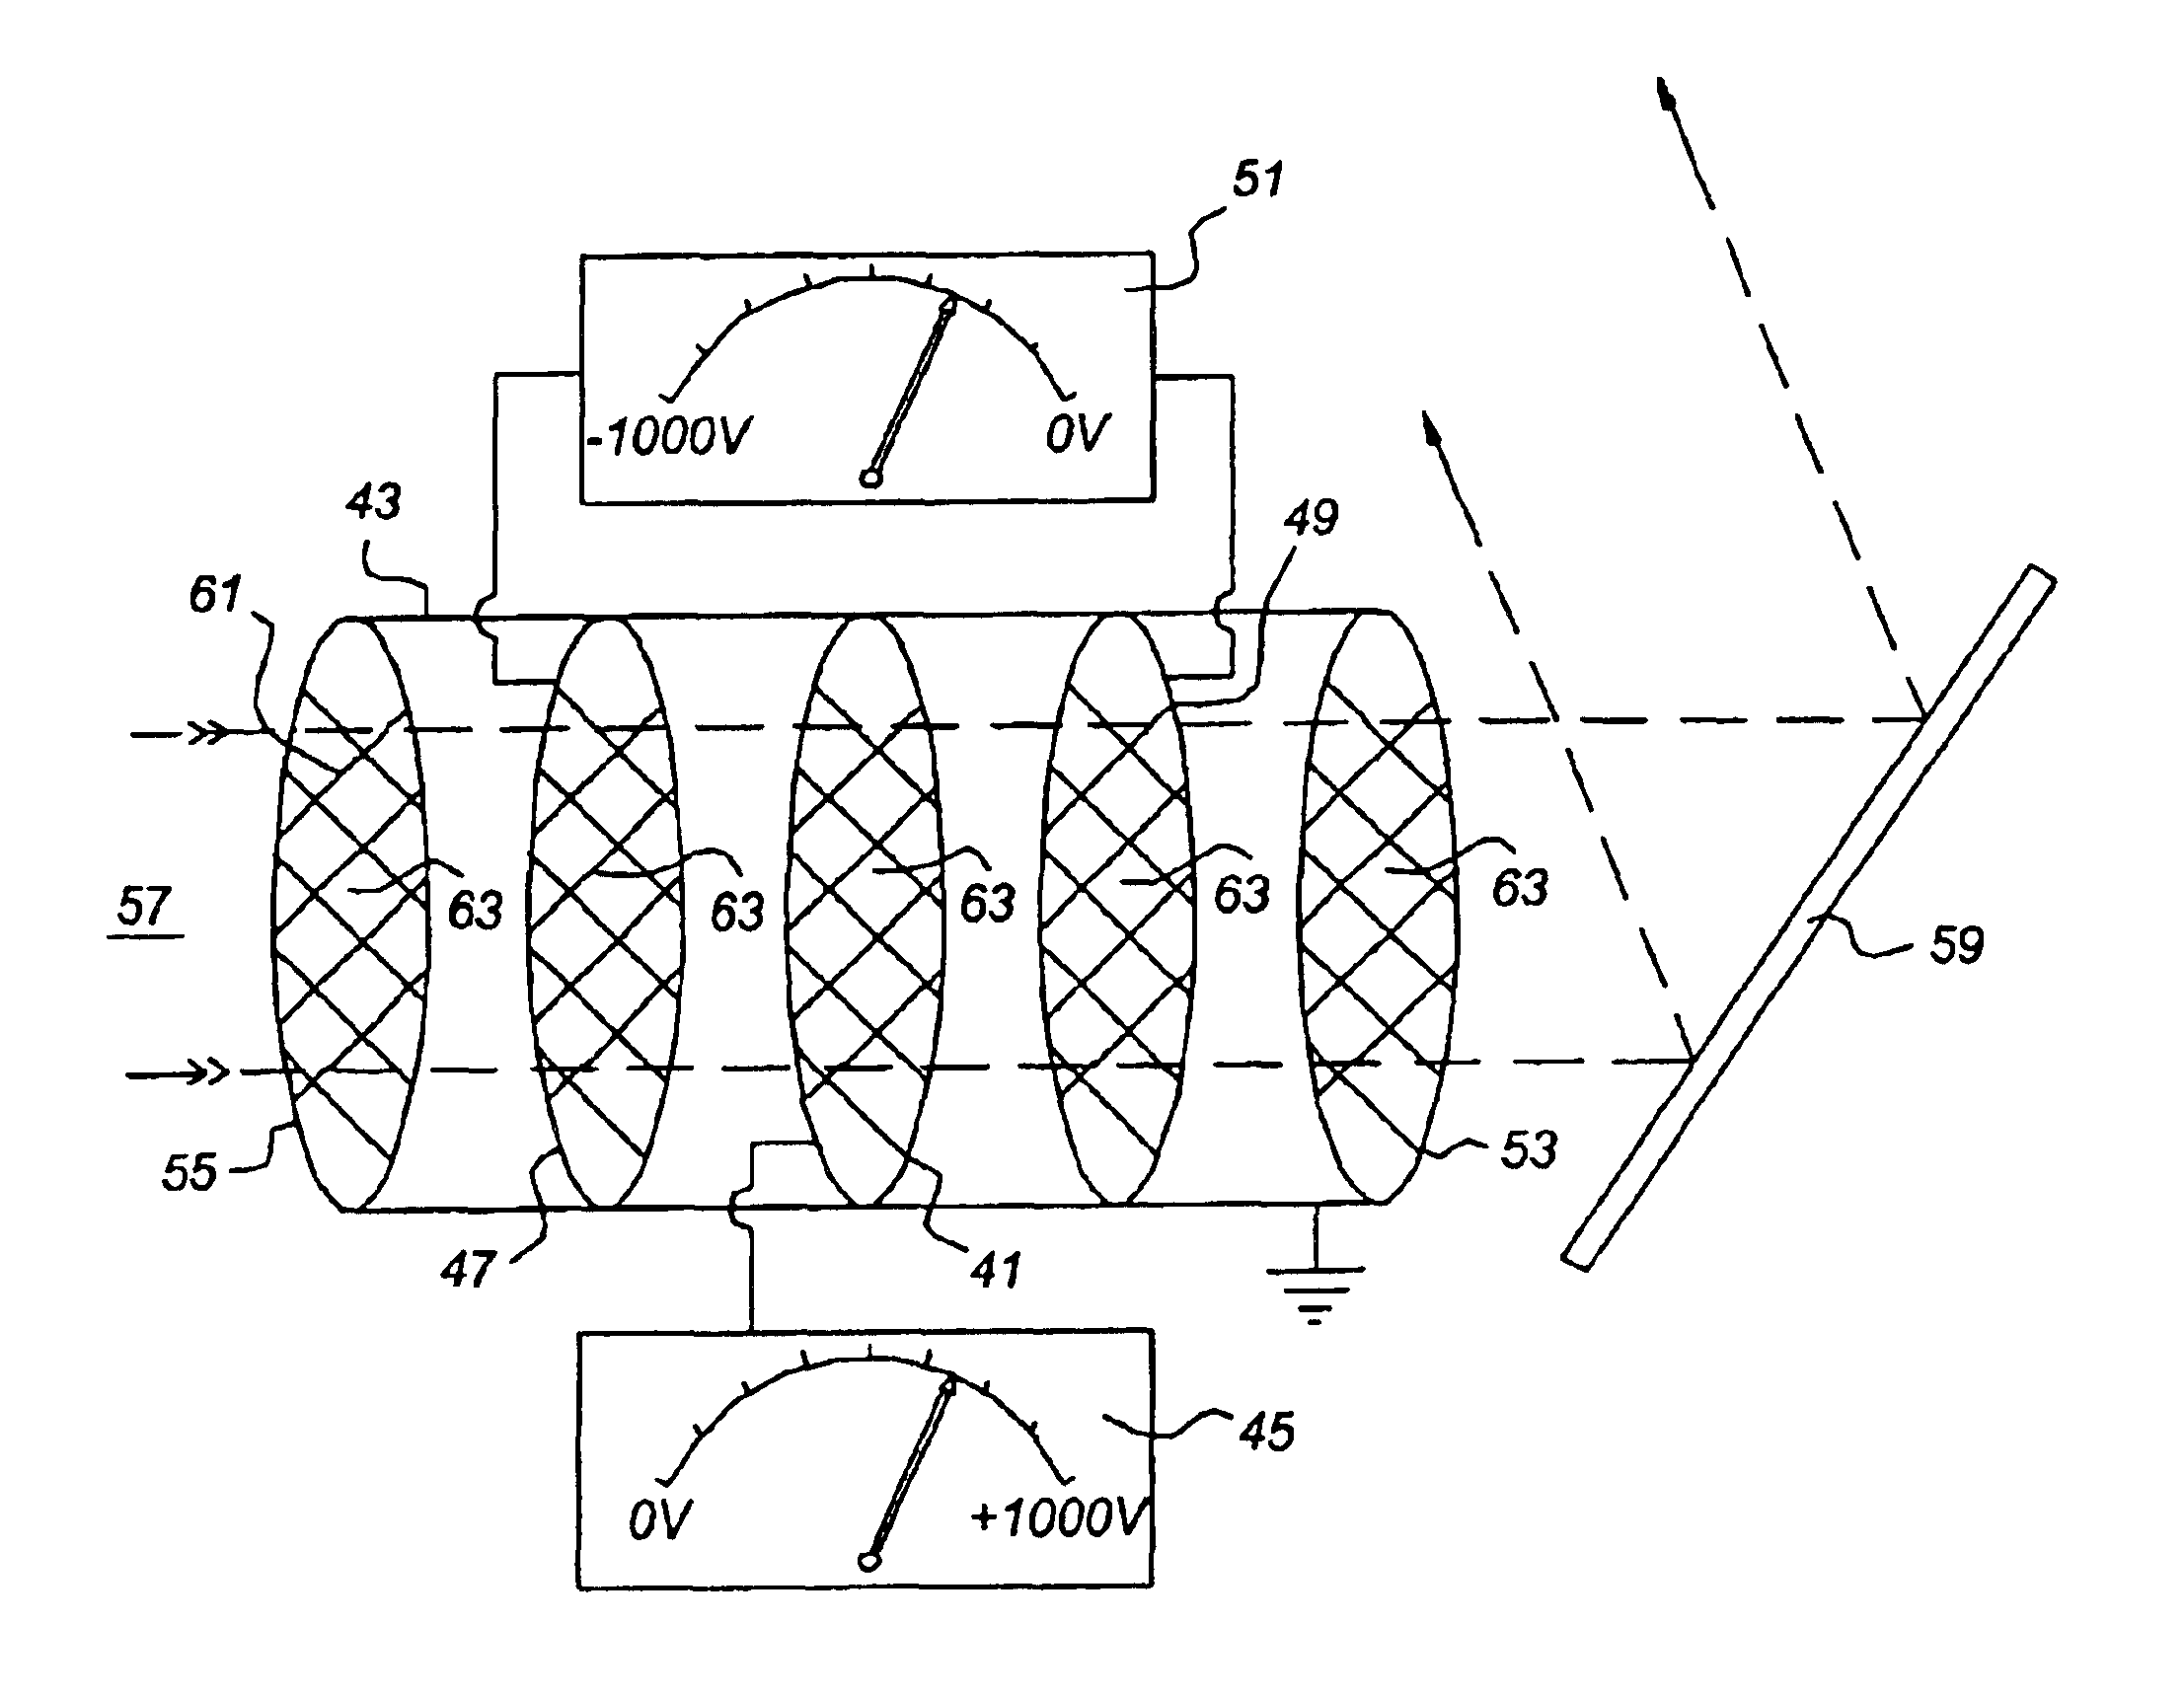 Lithographic projection apparatus with multiple suppression meshes